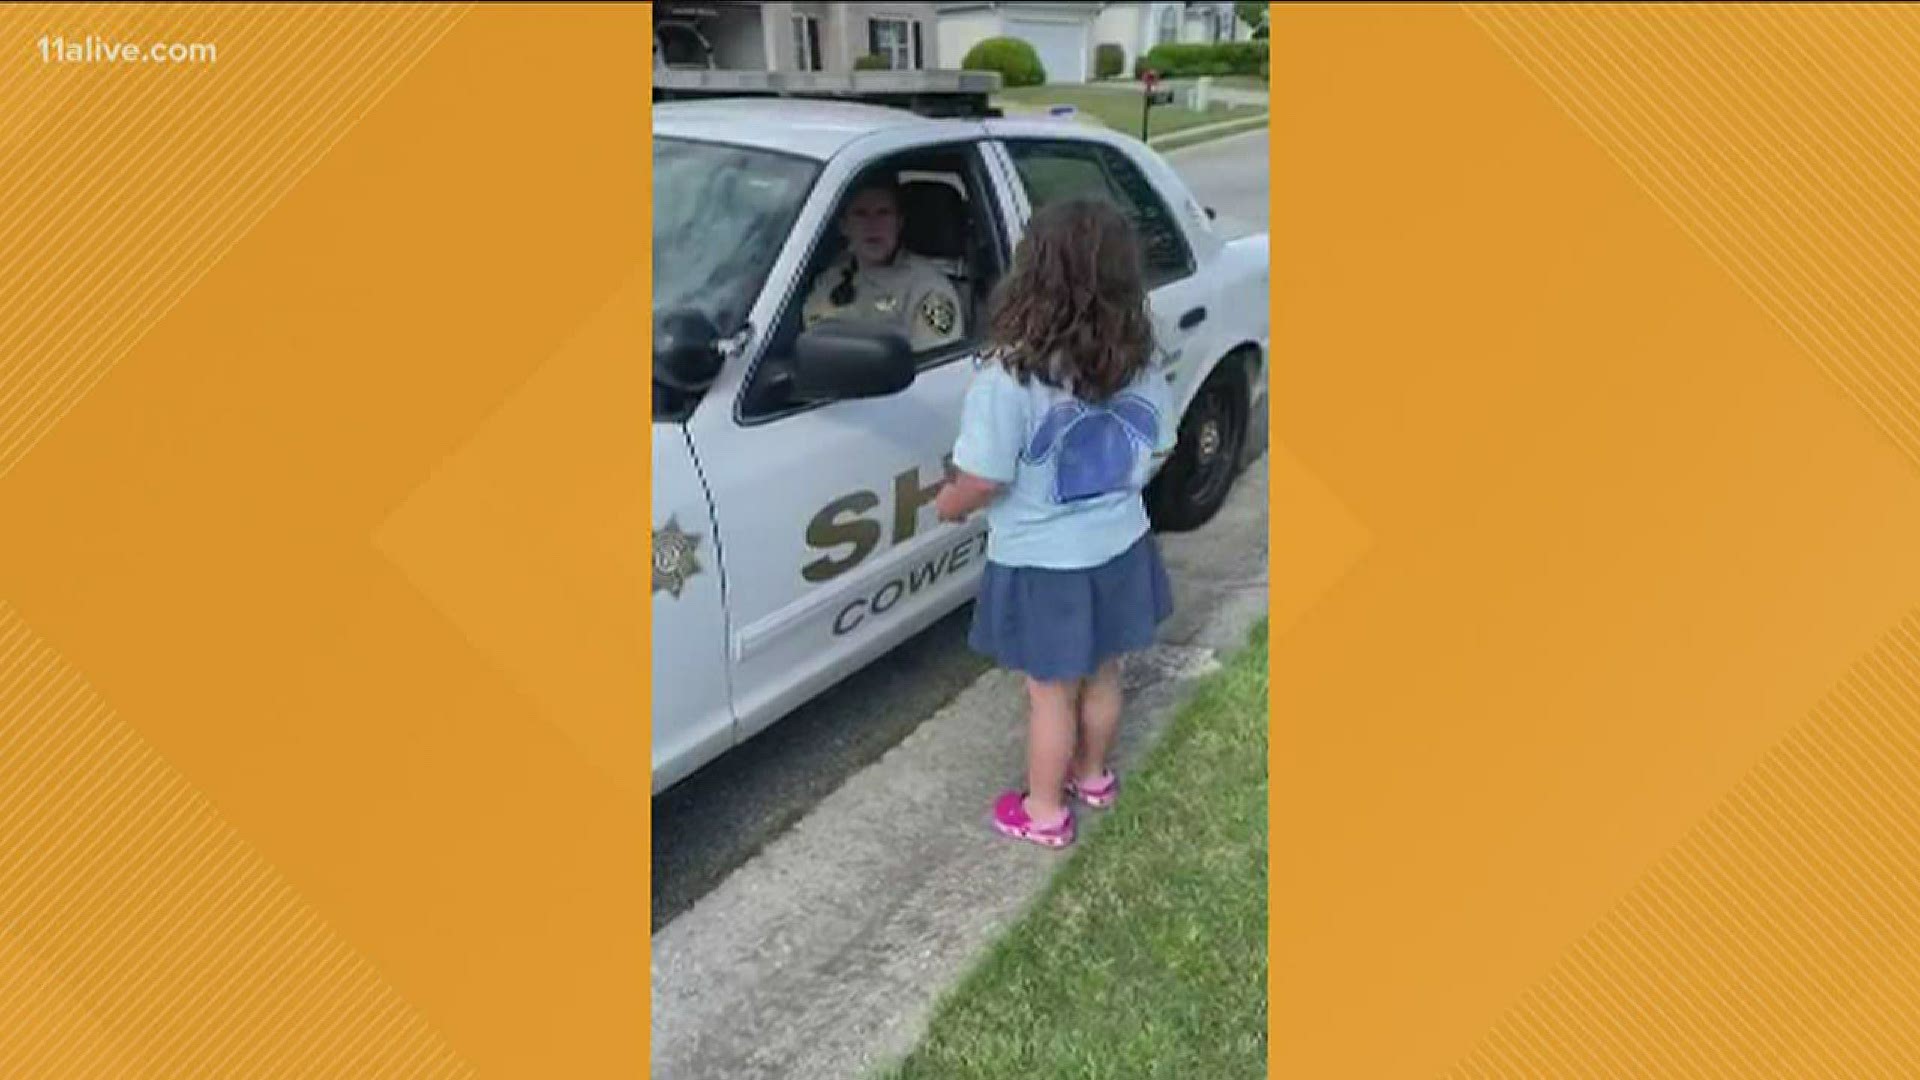 Every morning, Deputy Dorsey shares a sweet good-bye ritual with his daughter, who is autistic and non verbal.